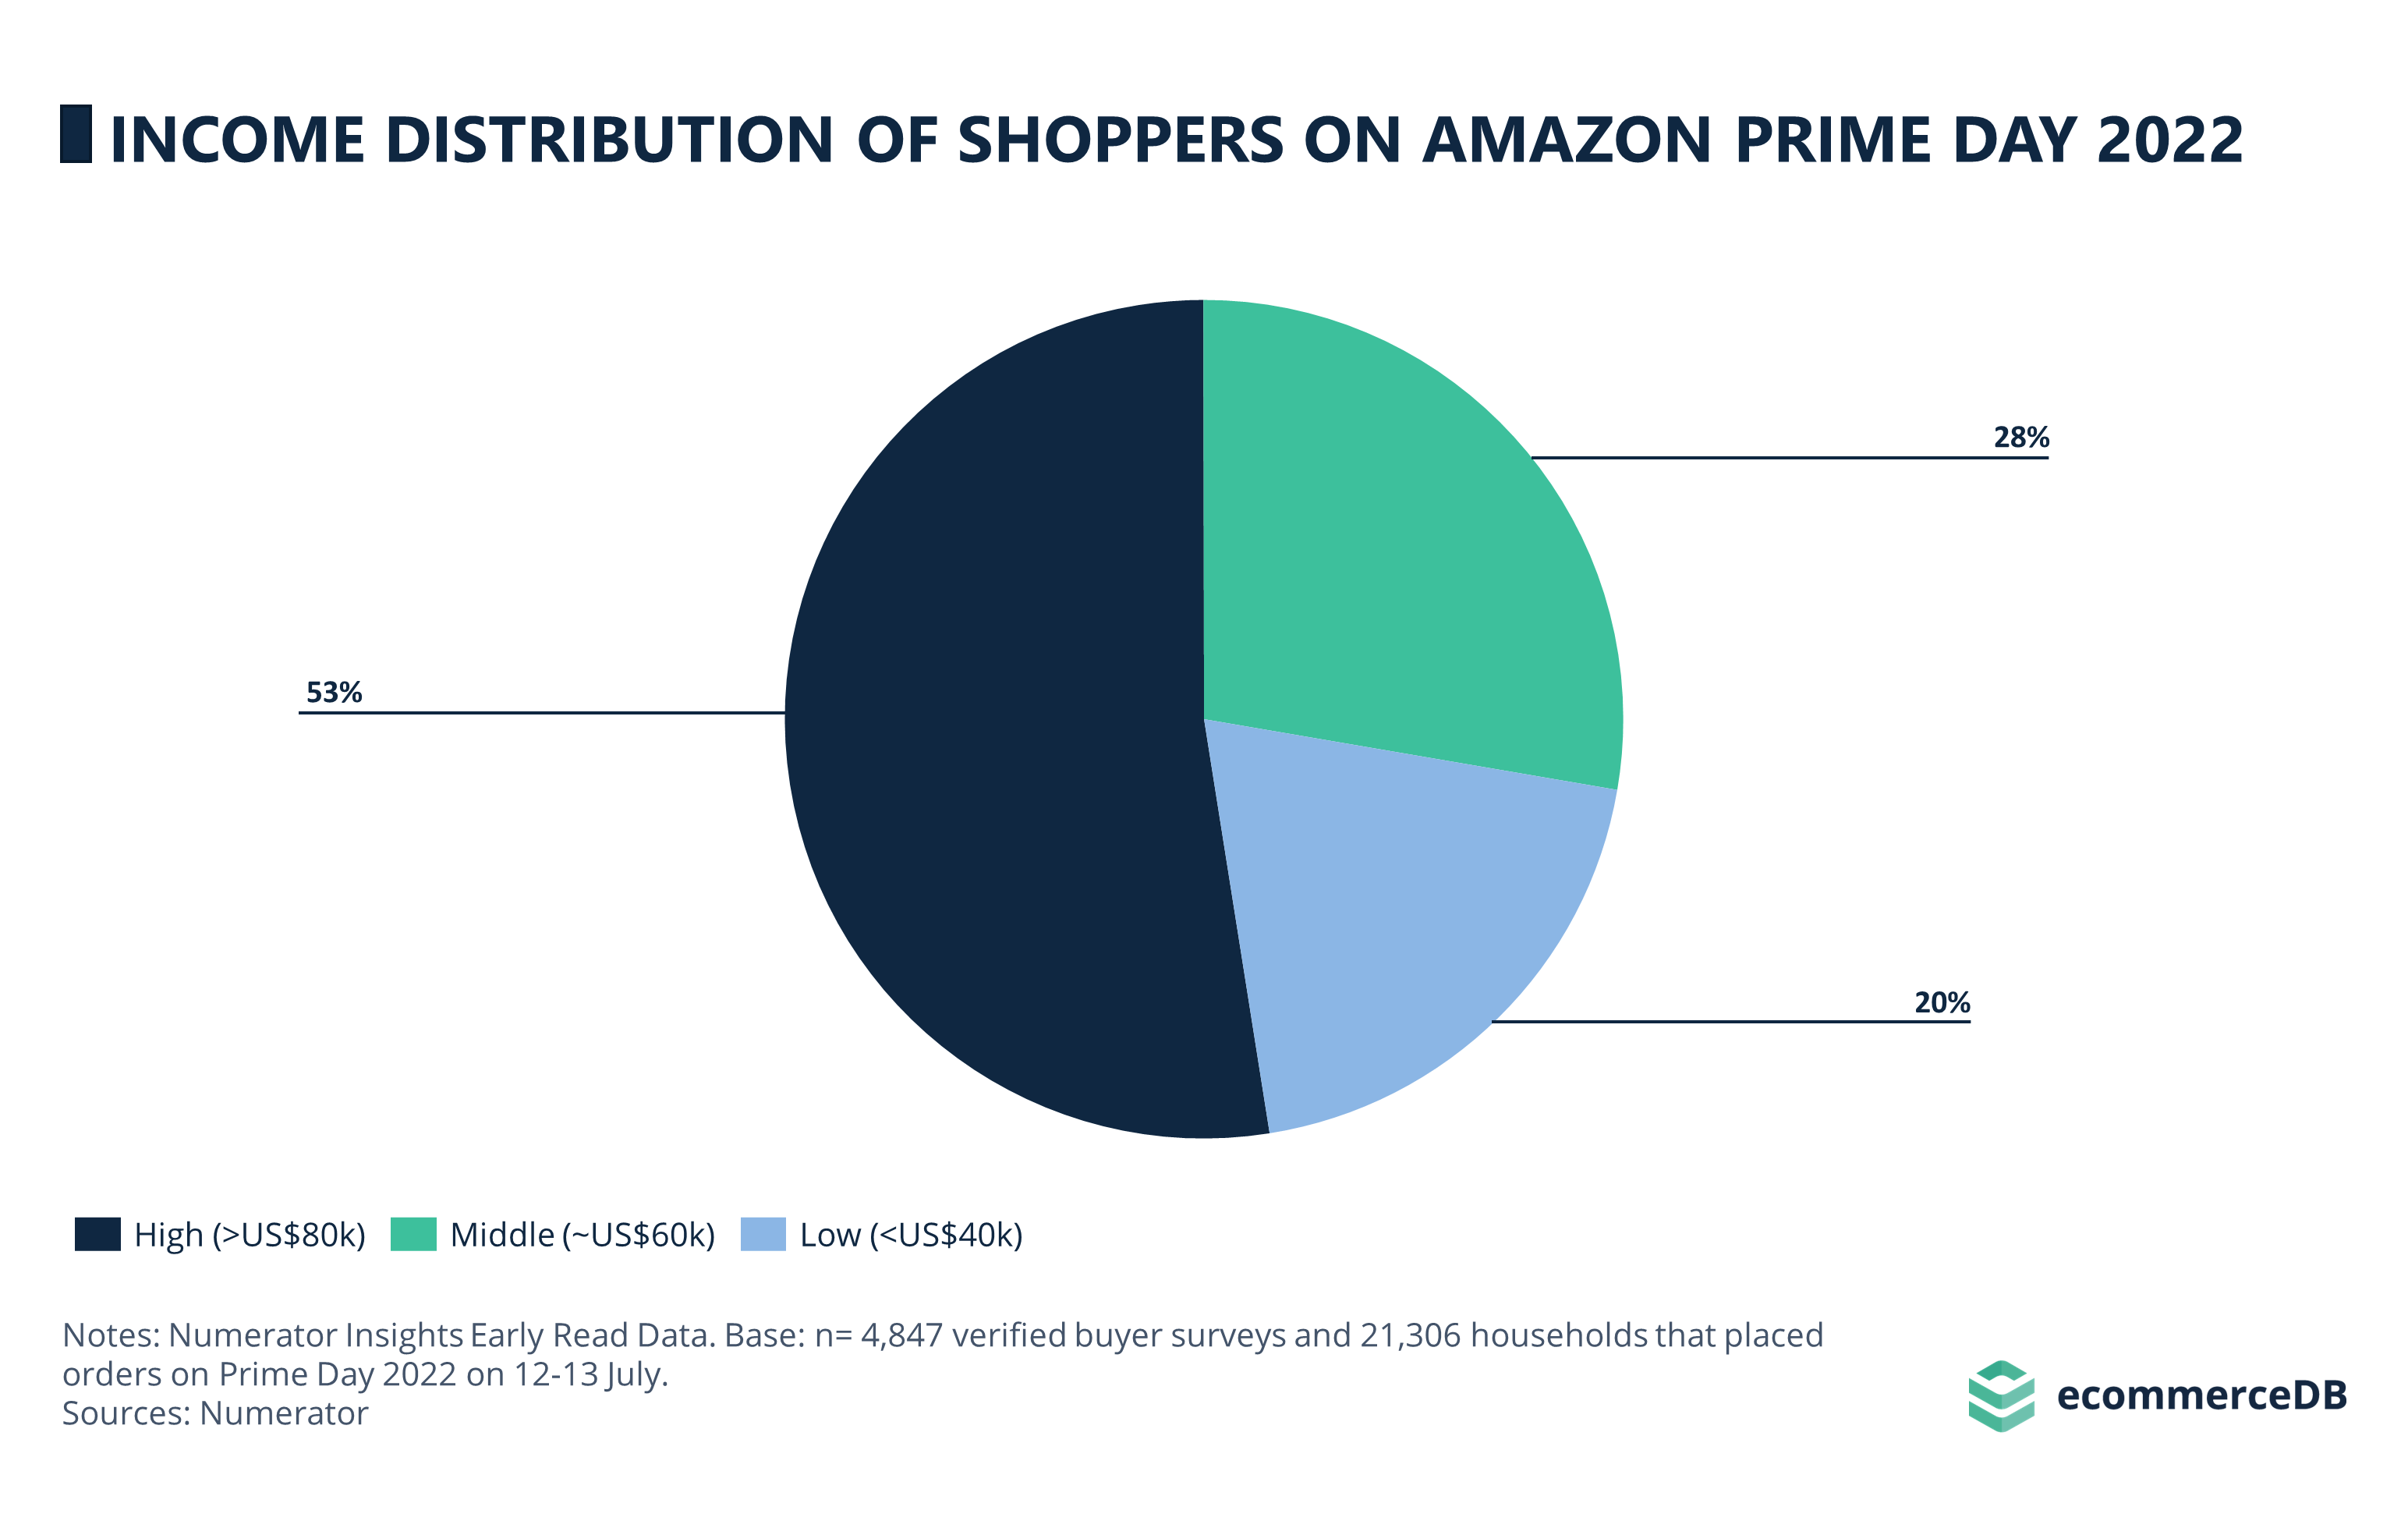 Income Distribution of Shoppers on Prime Day 2022